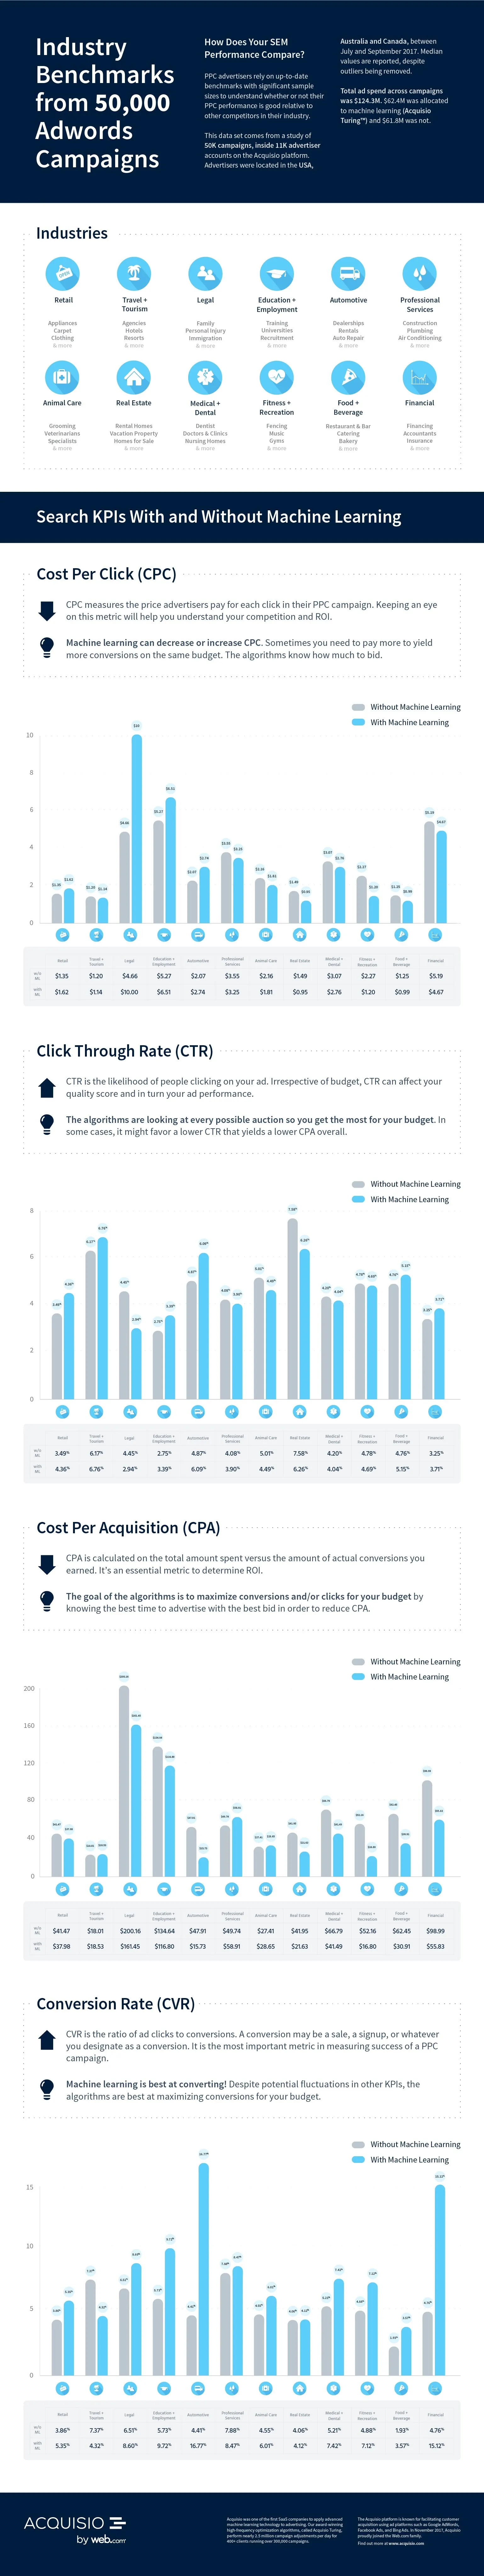 Google AdWords Benchmarks by Industry [Infographic]